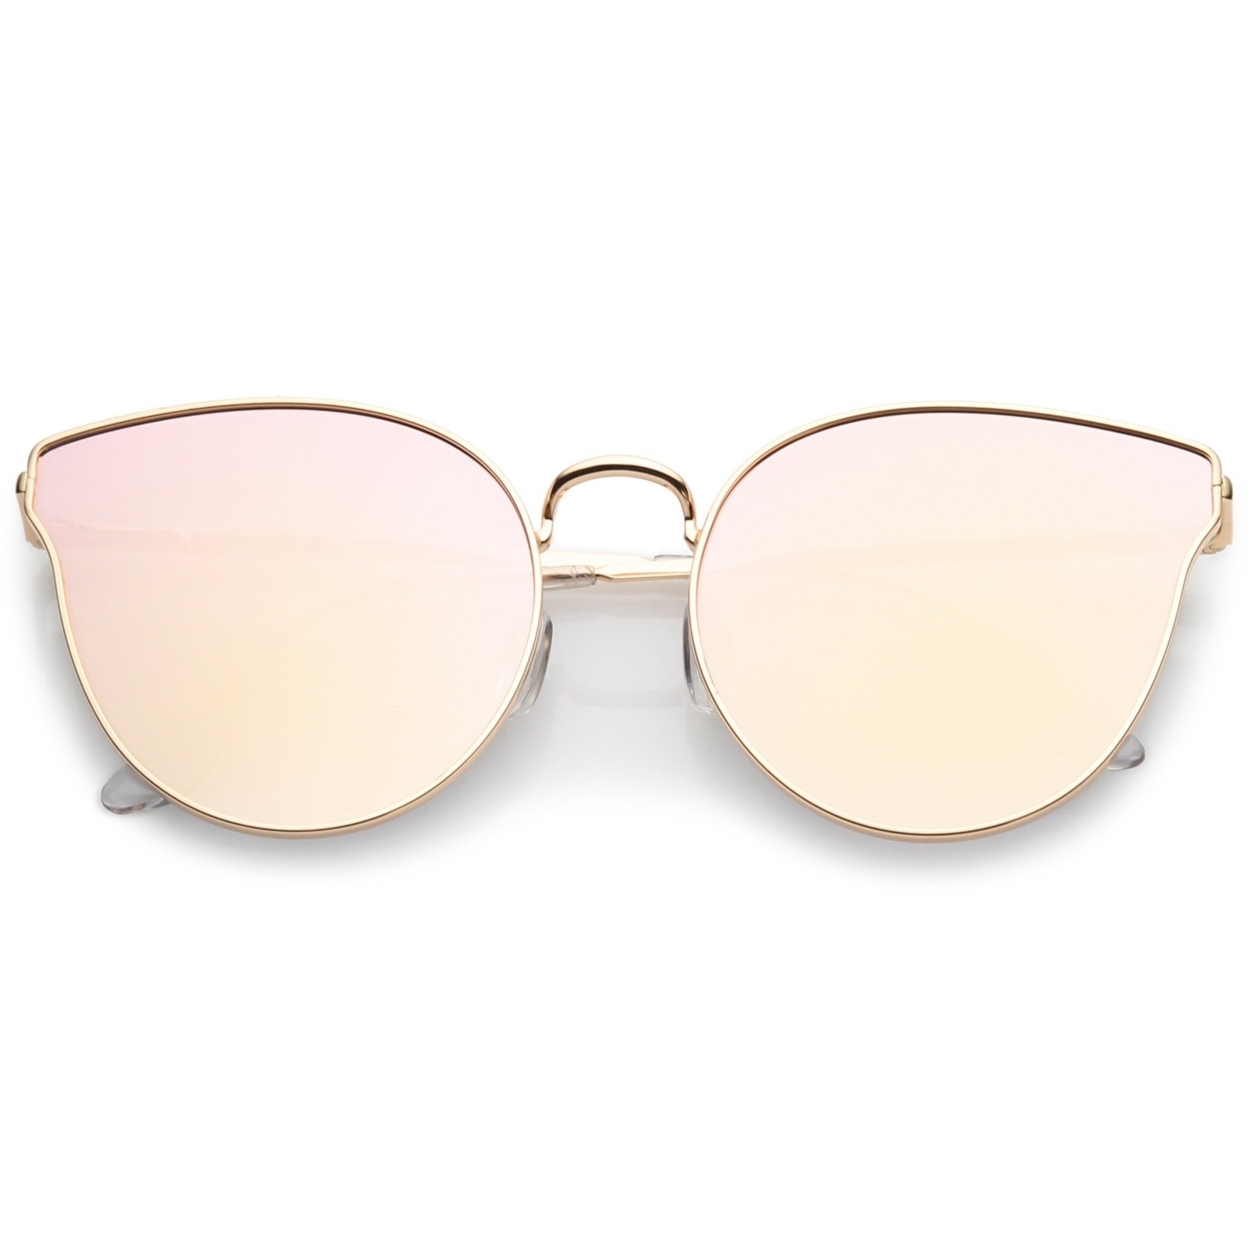 Premium Metal Cat Eye Sunglasse With Slim Arms And Round Pink Mirror Flat Lens 54mm - Rose Gold / Pink Mirror